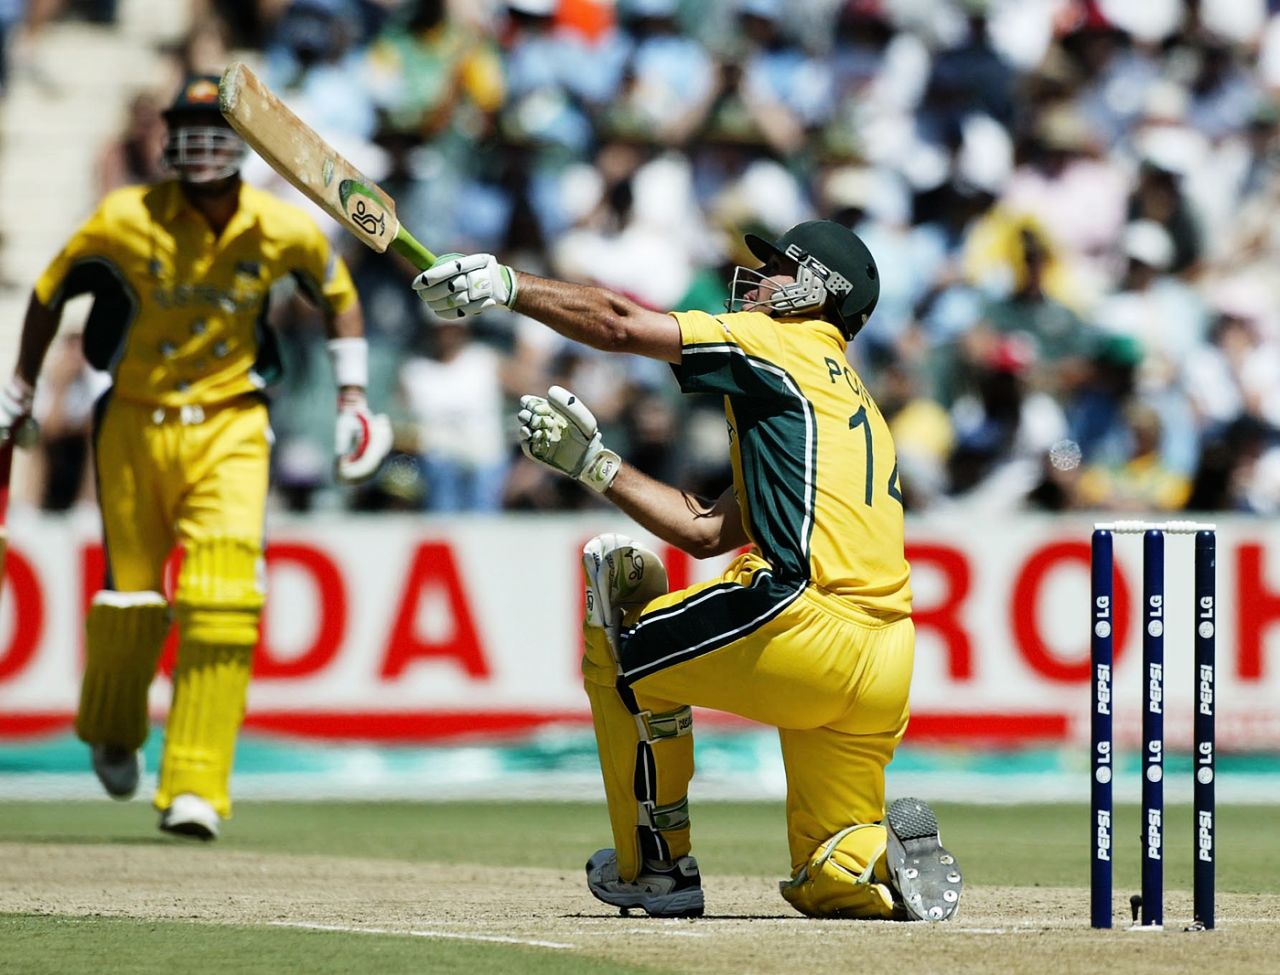 Ricky Ponting's hand slips off his bat, Australia v India, World Cup final, Johannesburg, March 23, 2003